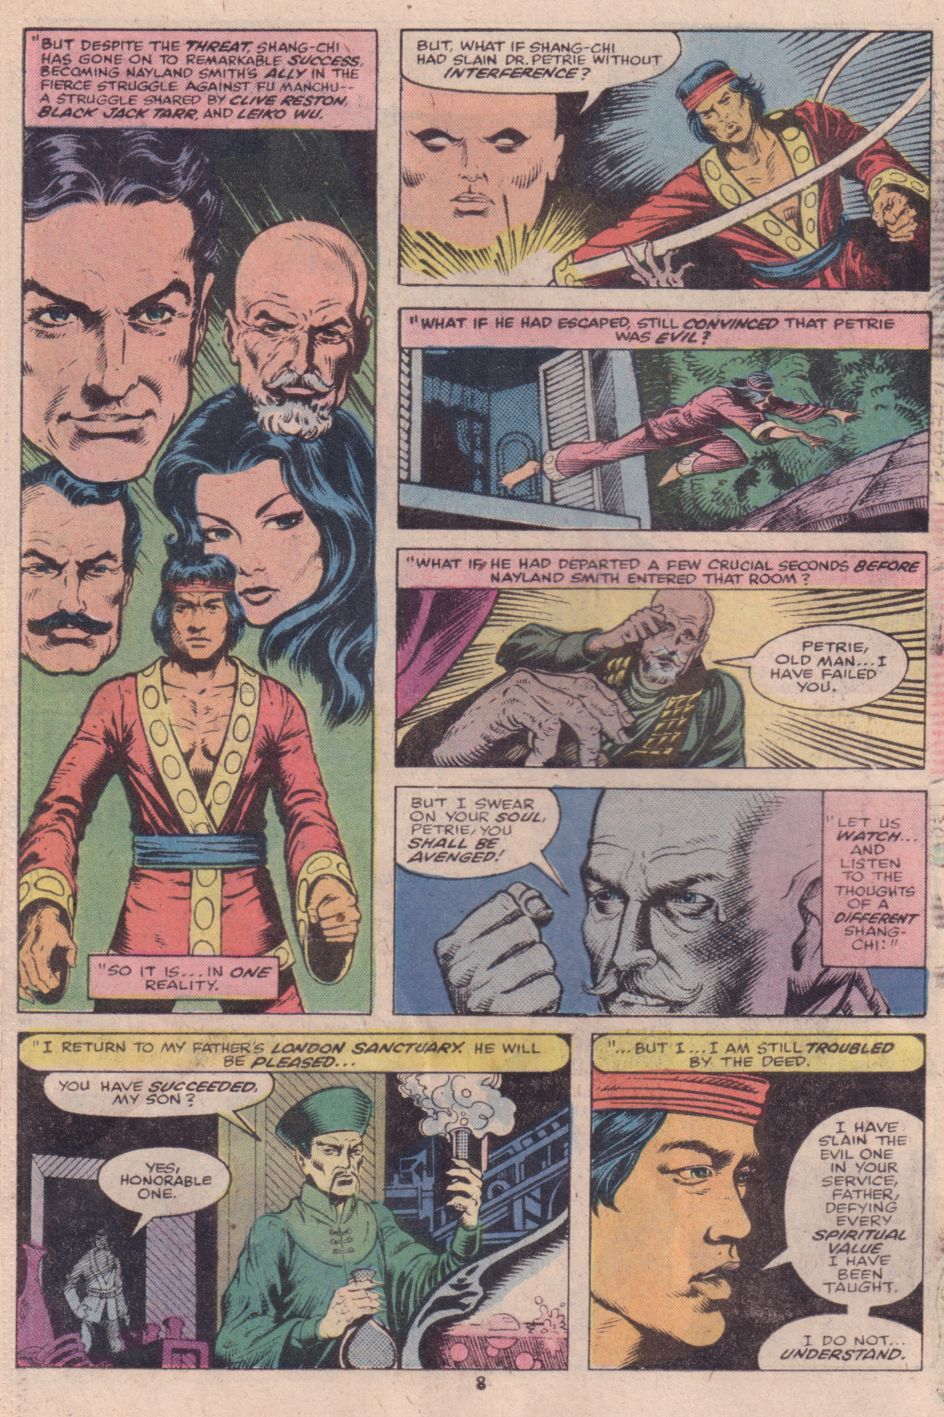 What If? (1977) Issue #16 - Shang Chi Master of Kung Fu fought on The side of Fu Manchu #16 - English 7